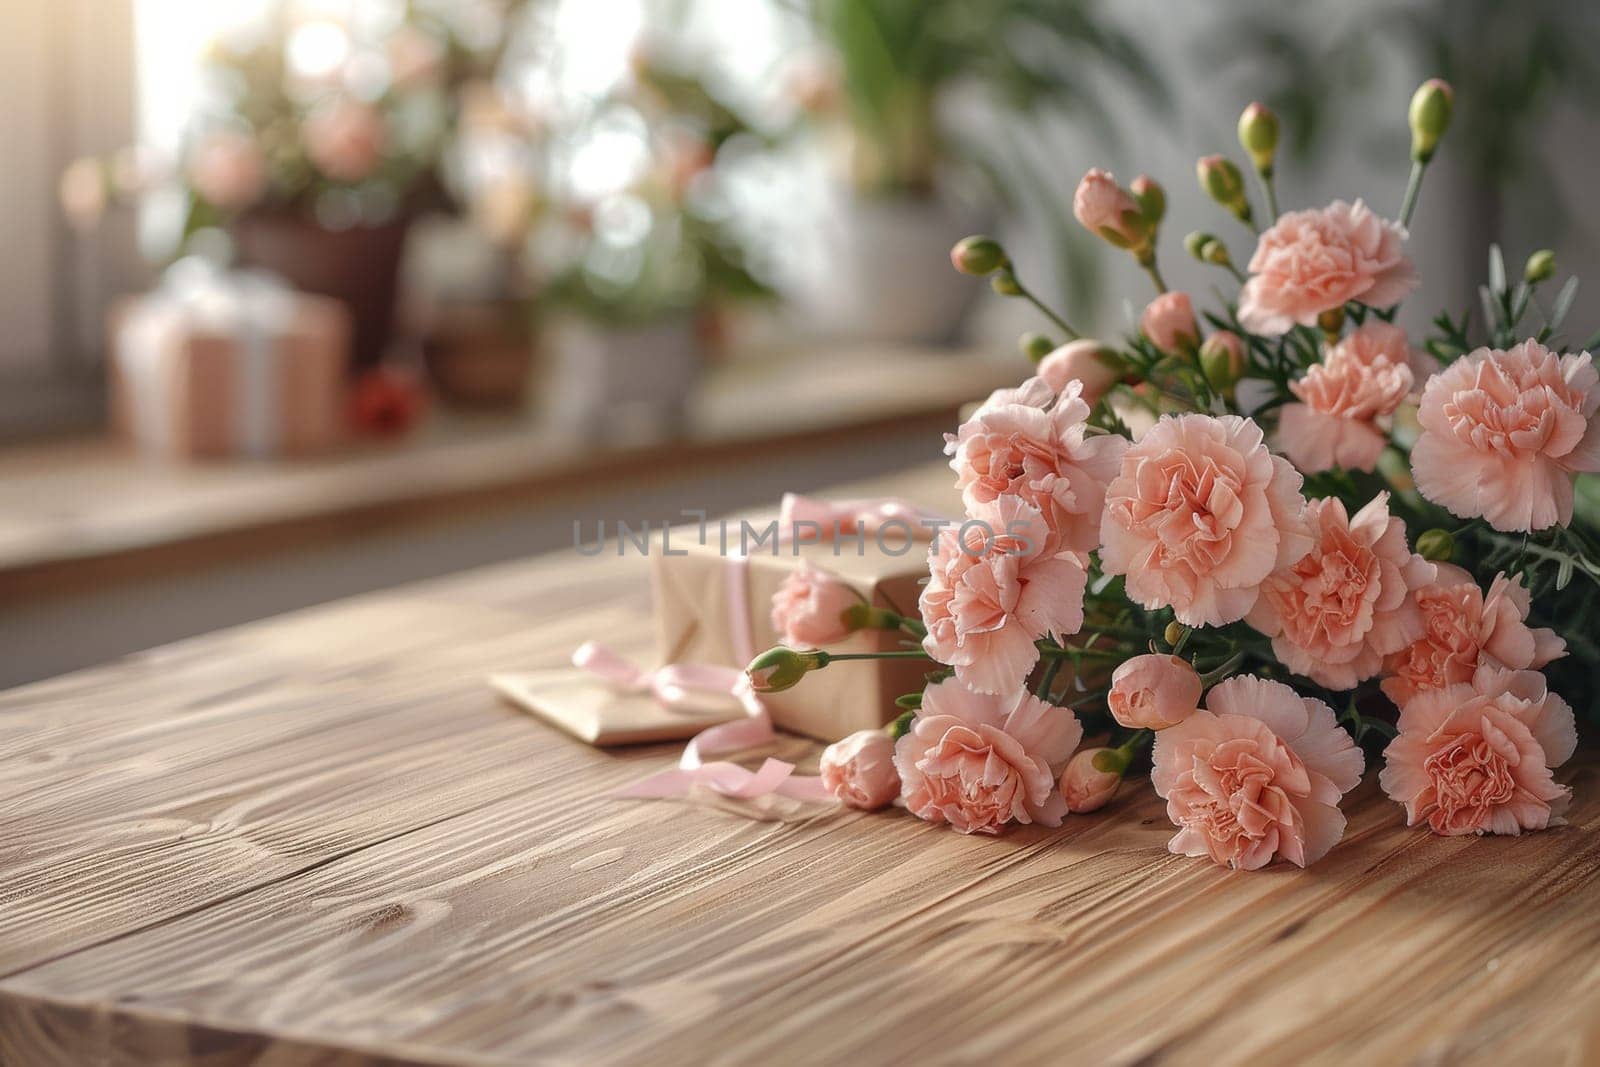 A white background with pink flowers and brown boxes. Birthday concept by itchaznong